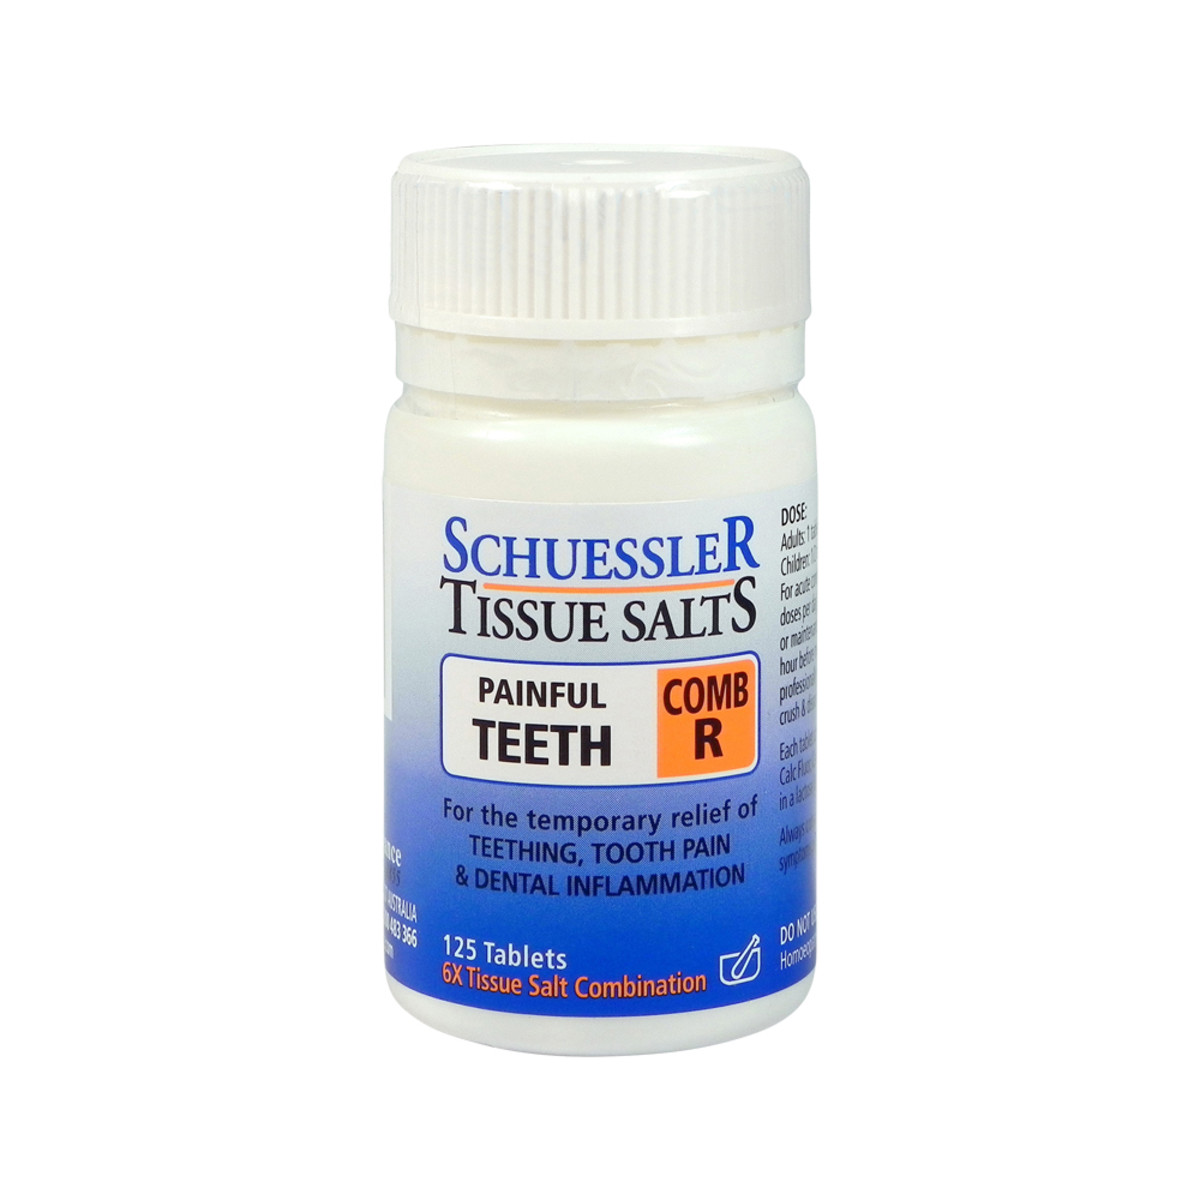 Schuessler Tissue Salts Comb R (Painful Teeth) 125t